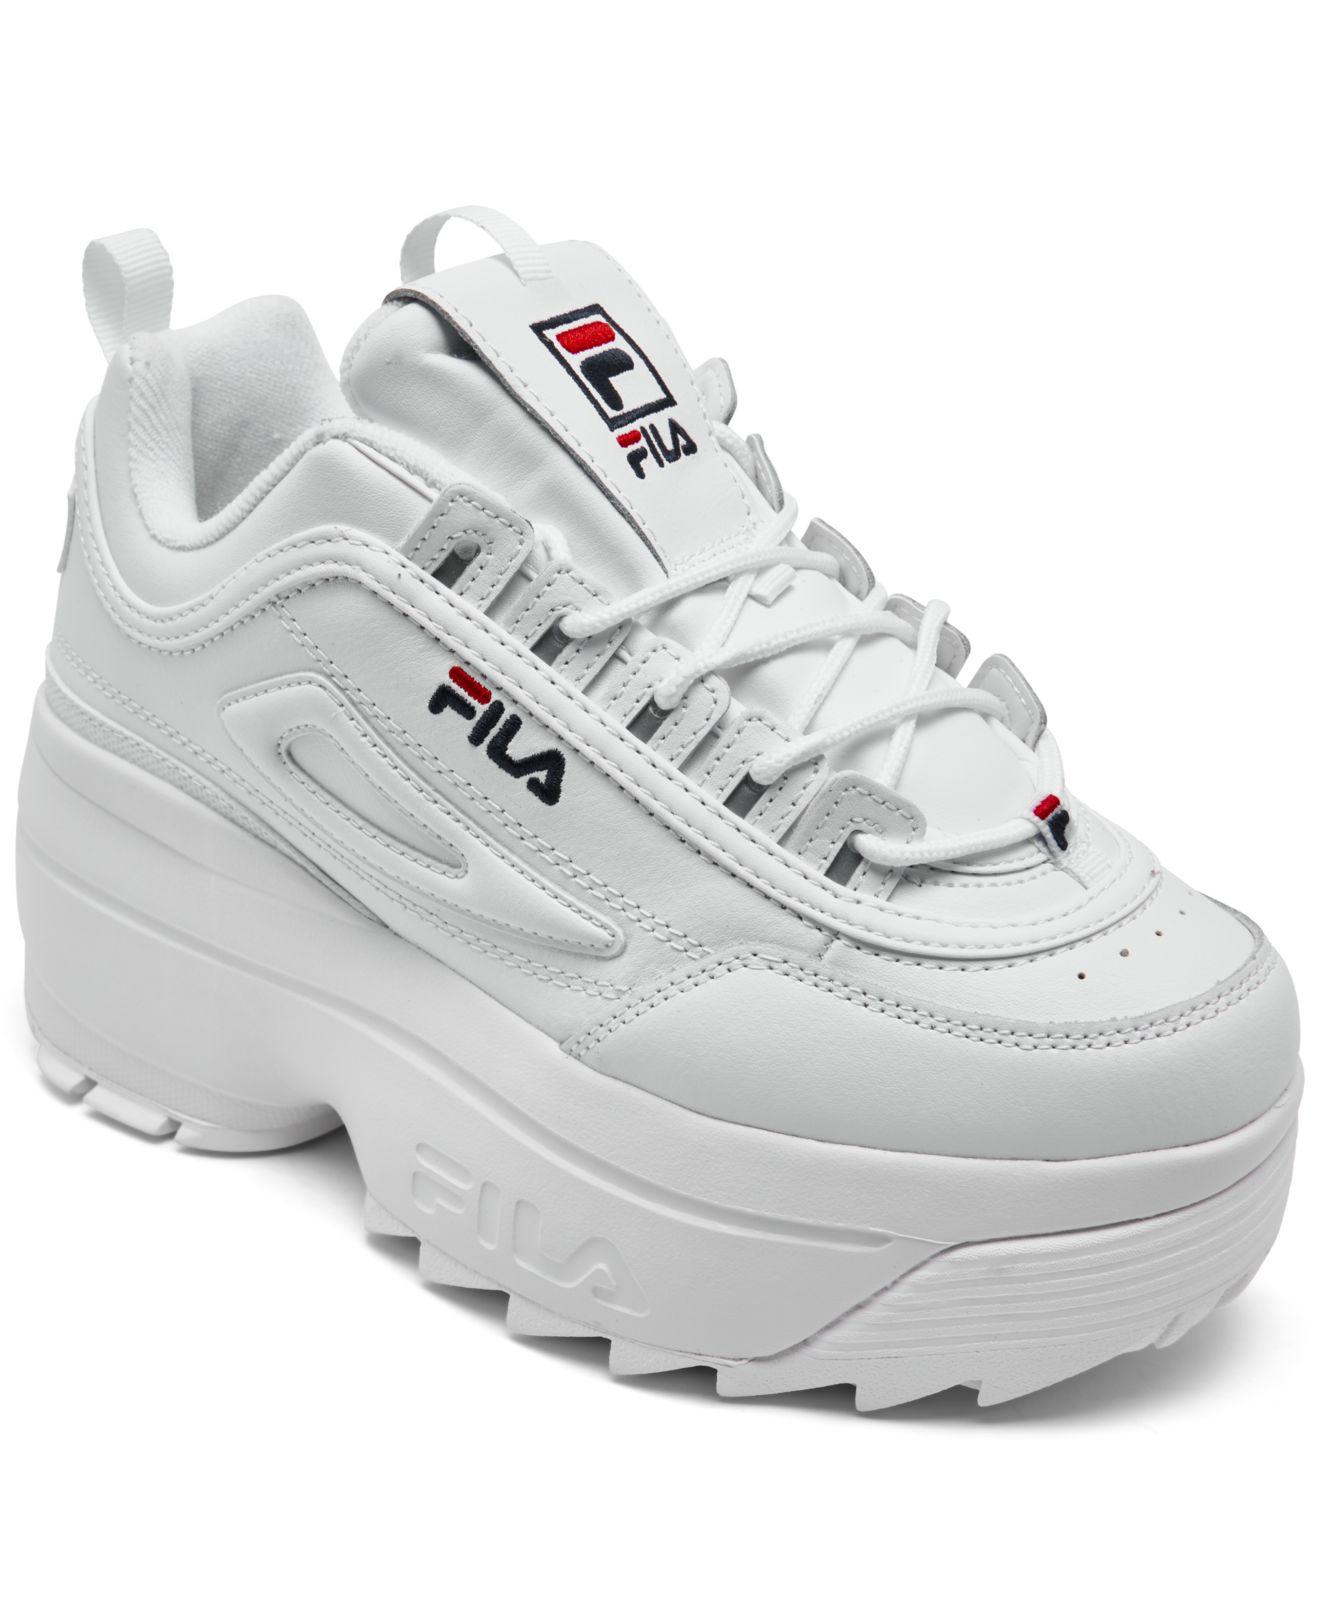 Fila Disruptor 2 Wedge Casual Sneakers From Finish Line in White | Lyst